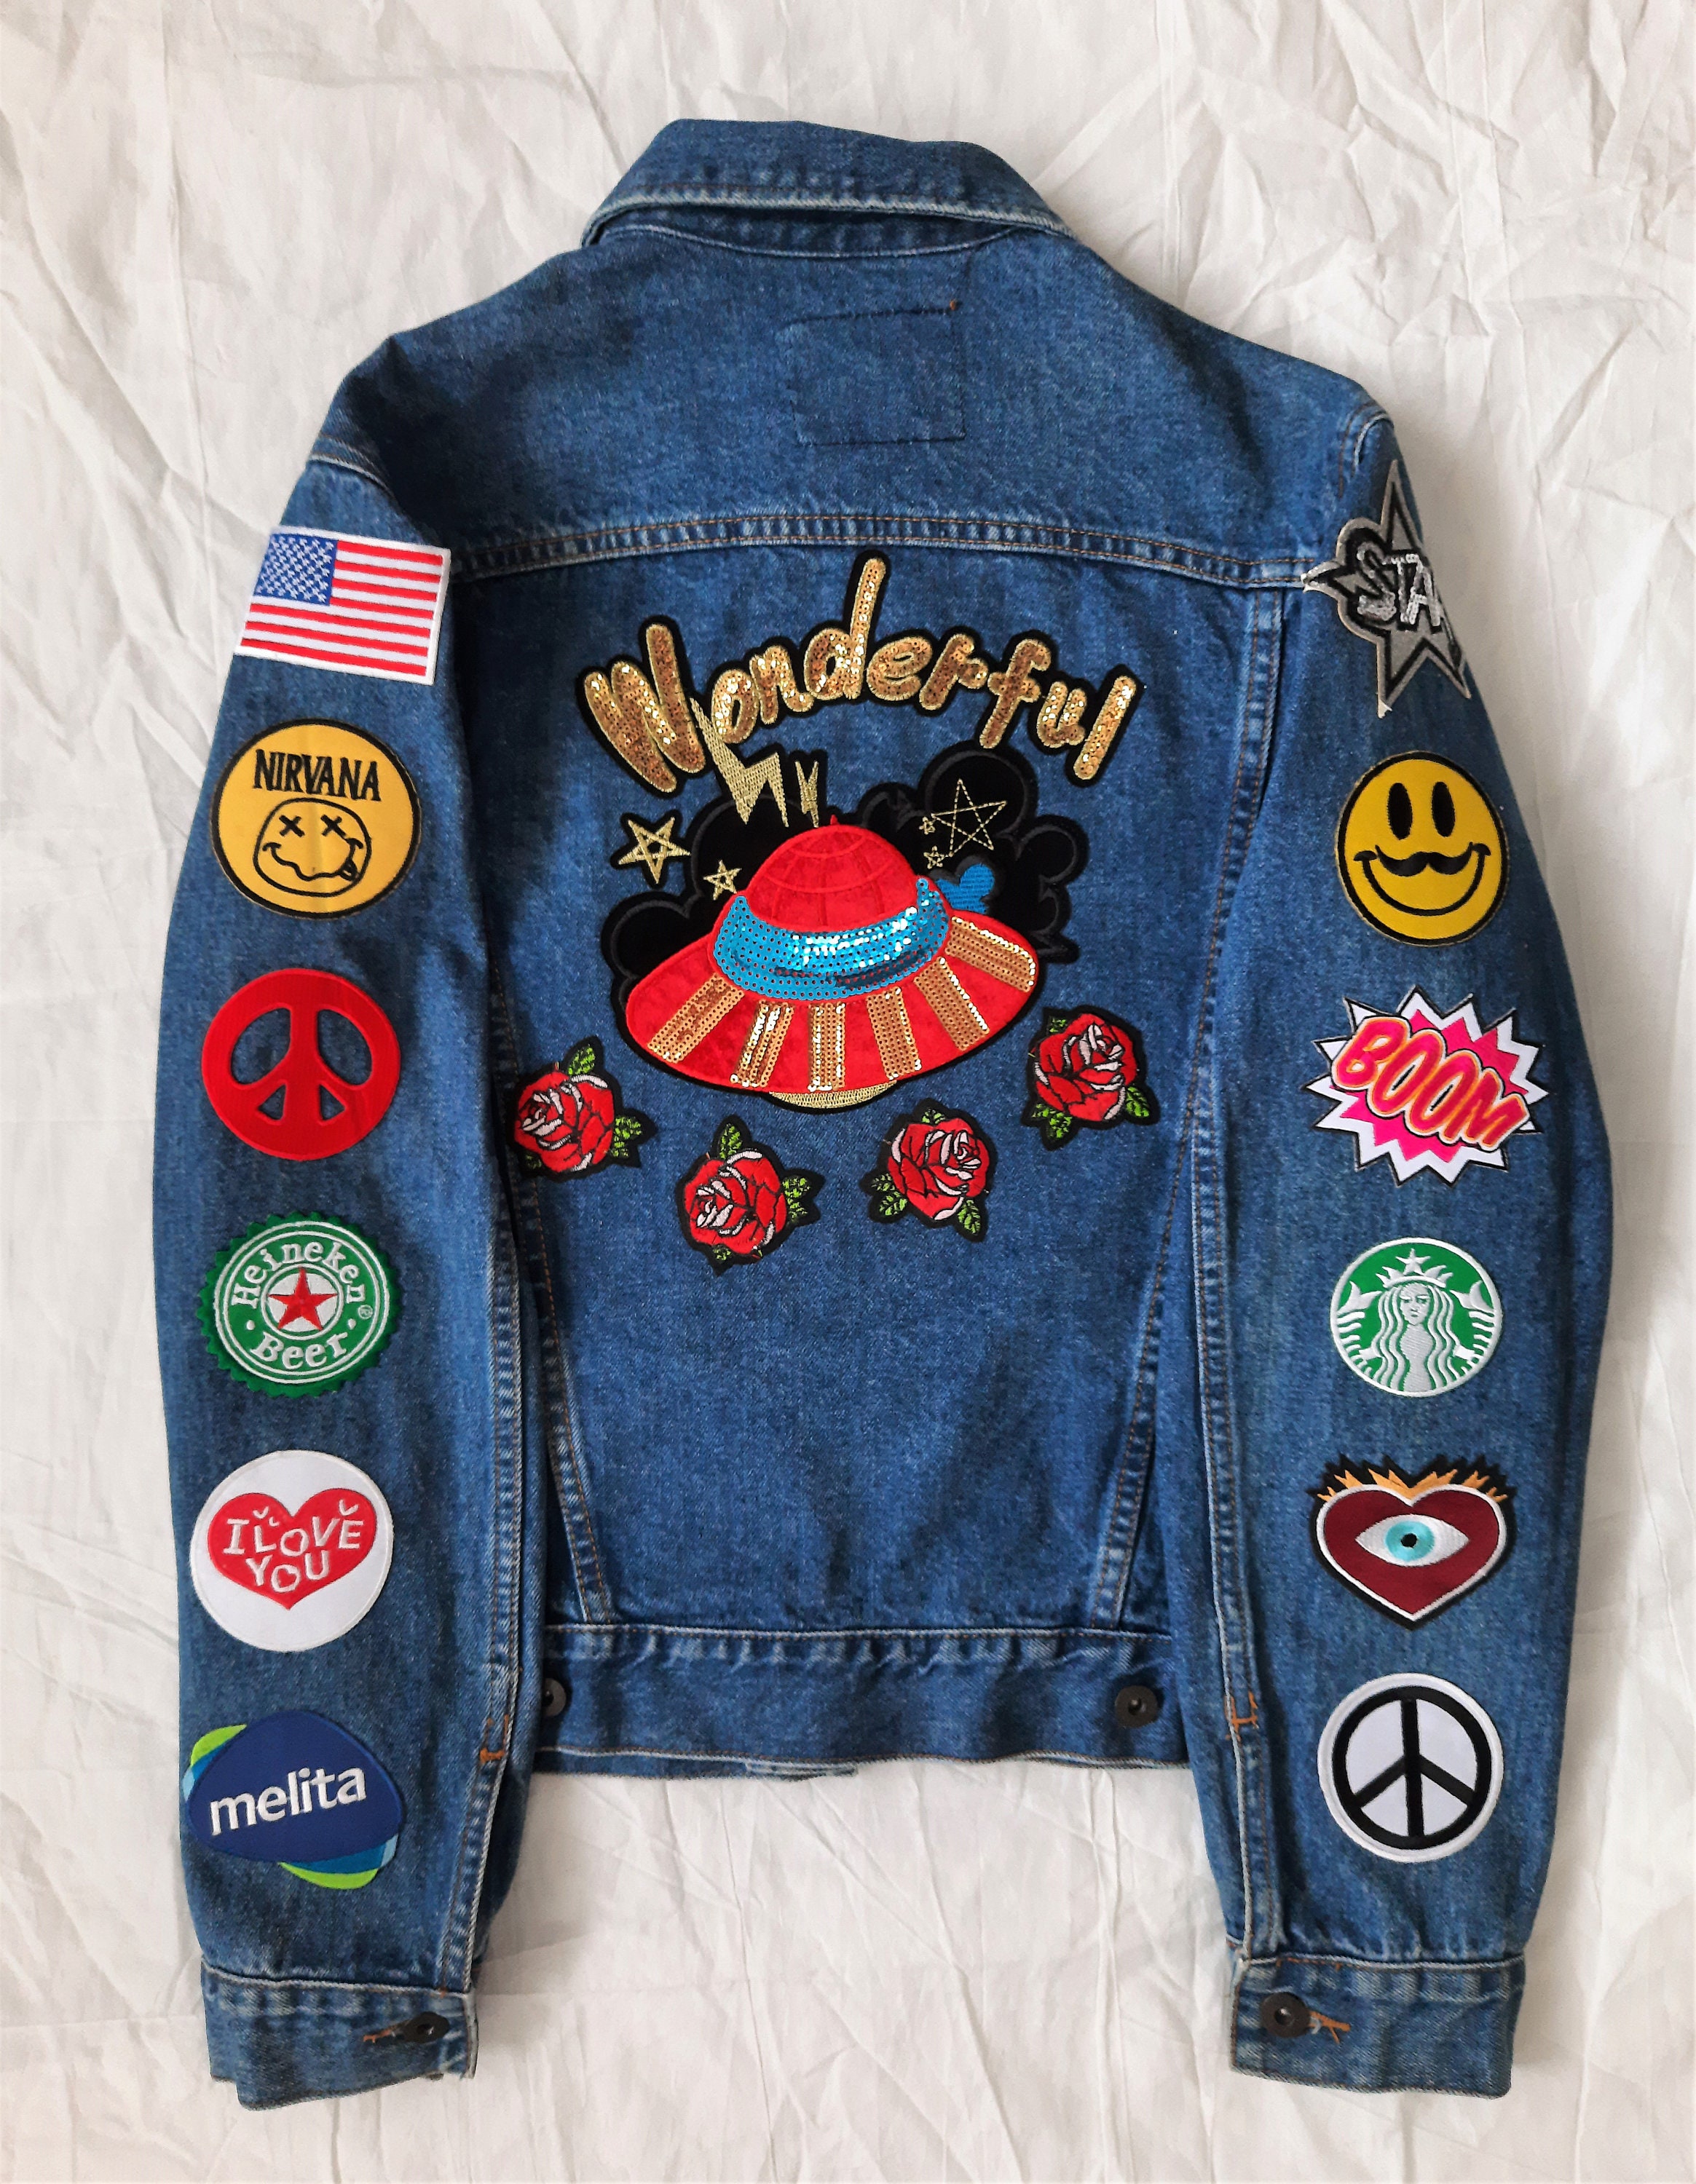 Patched Denim / Upcycled Jacket With Patches / Reworked Vintage Jean ...